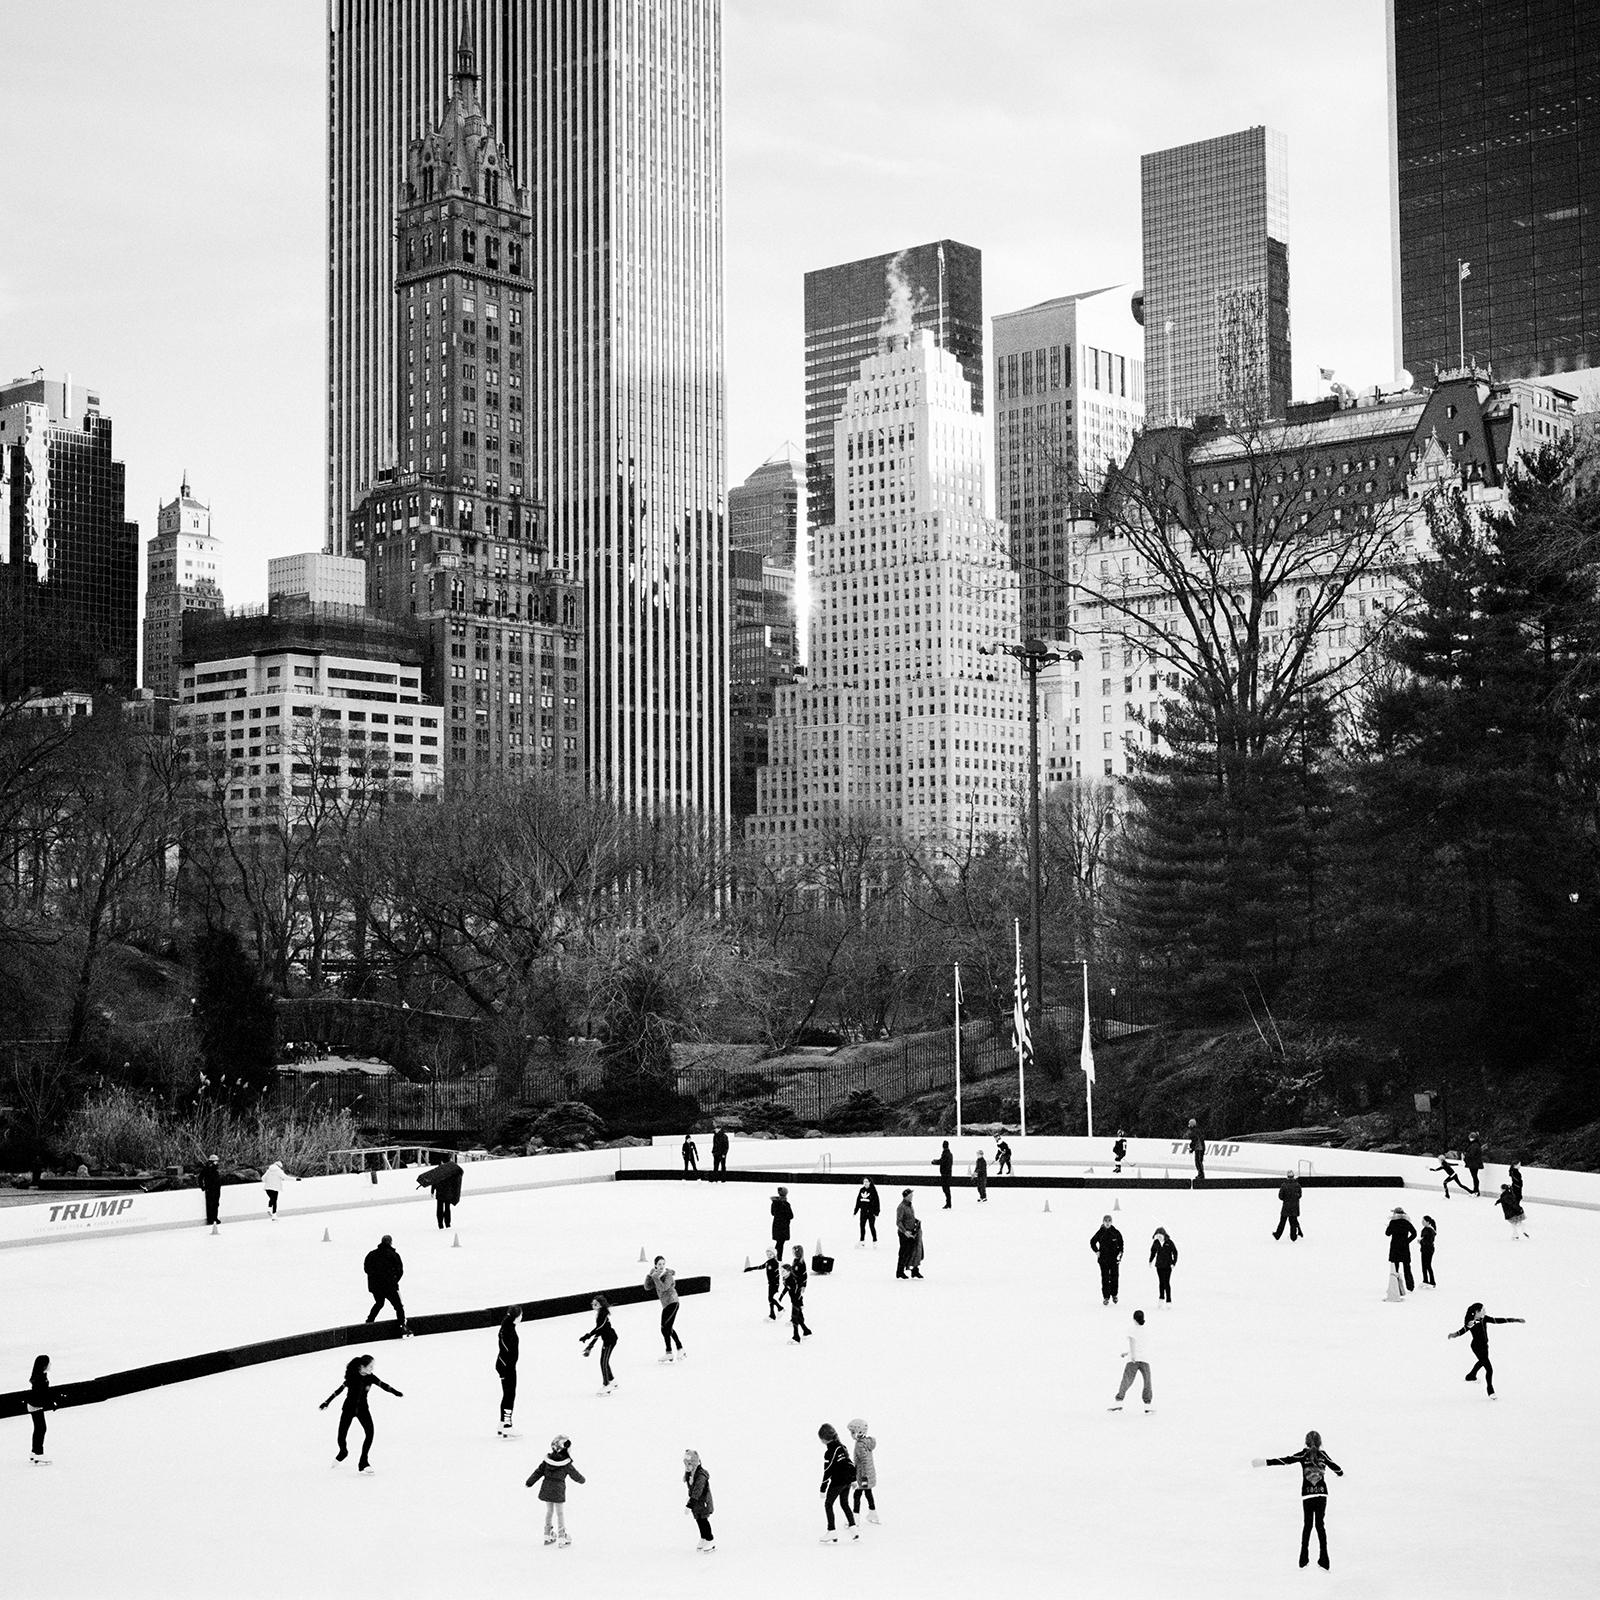 Dancing on Ice, skyscraper, New York, USA, black and white photography landscape For Sale 4